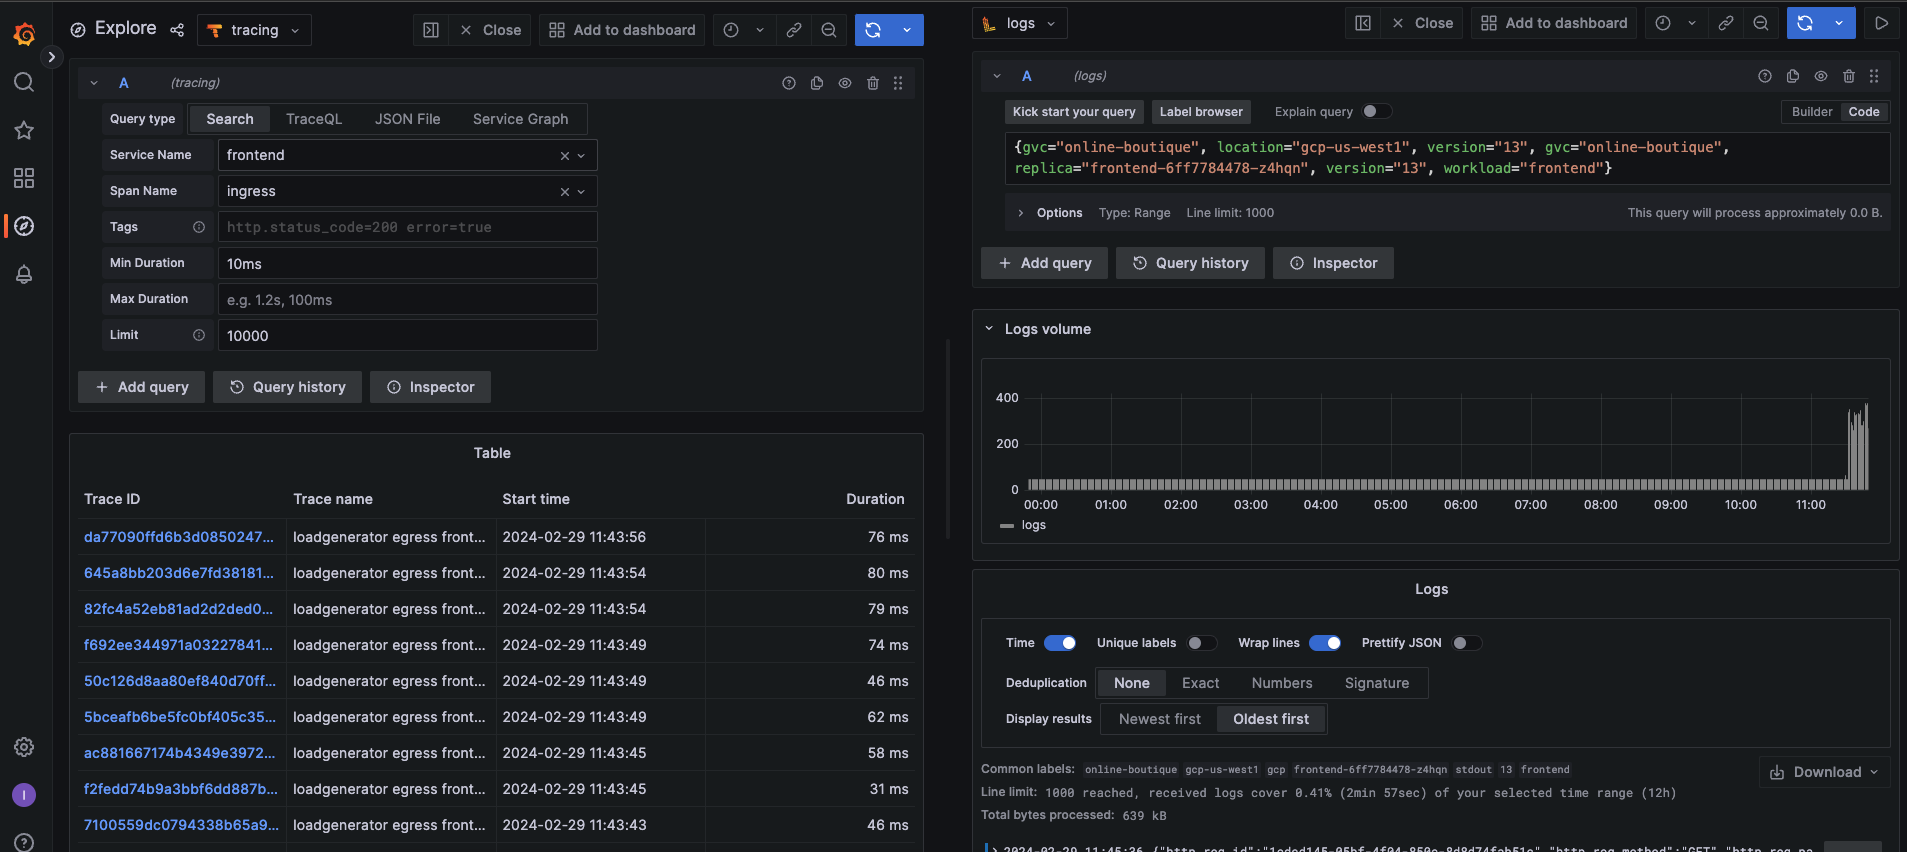 Screenshot shows Control Plane's tracing visualization in Grafana, enabling users to analyze performance data across their Global Virtual Cloud, with detailed filters for workloads, locations, and container-level metrics.